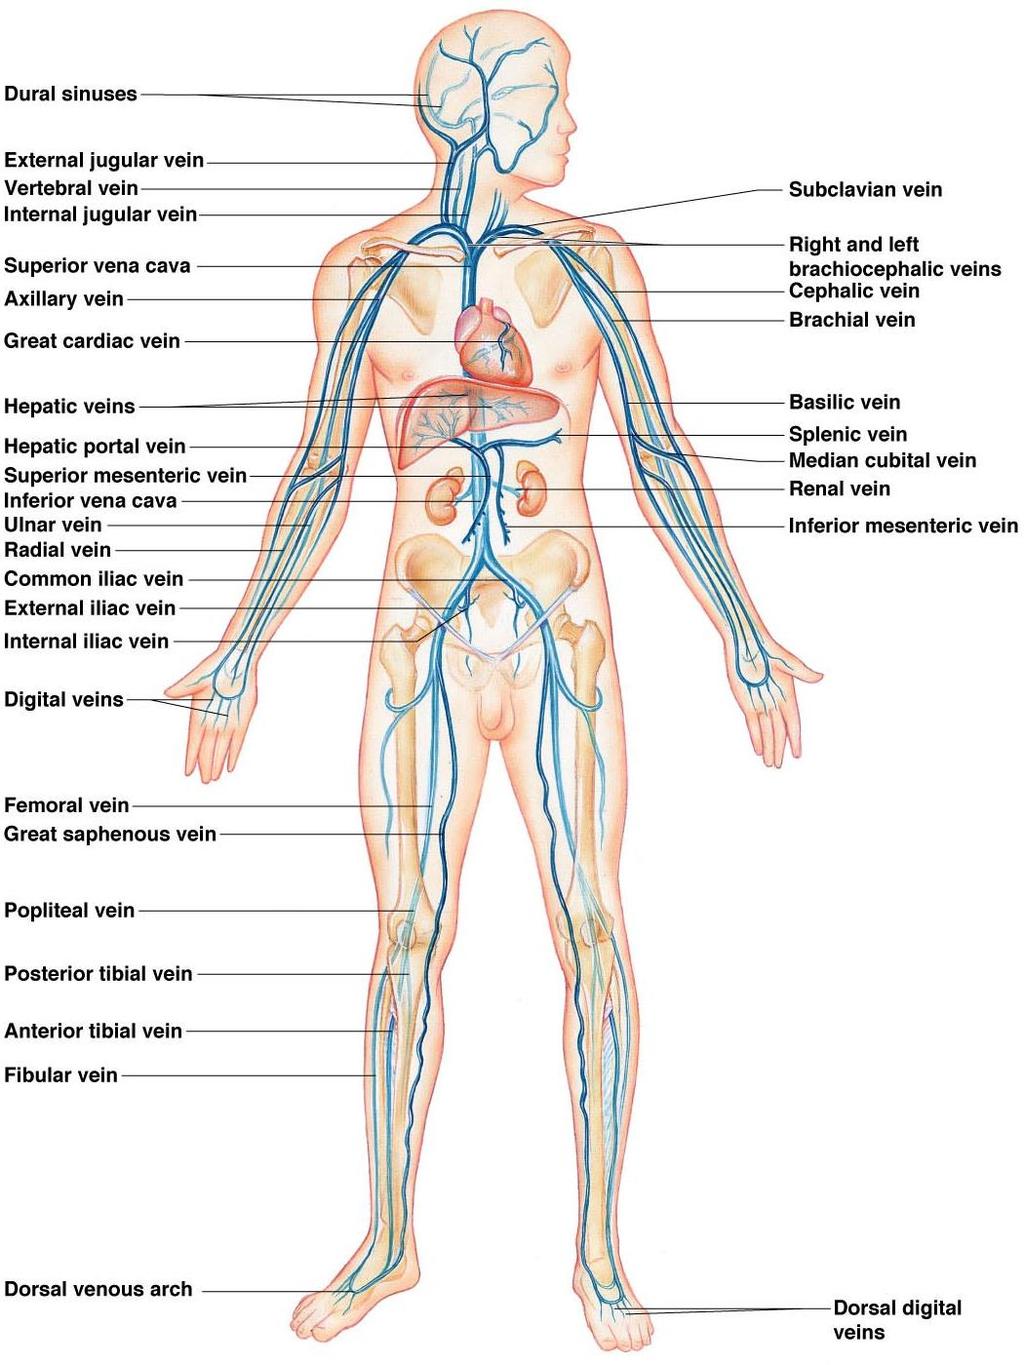 Major Veins of Systemic